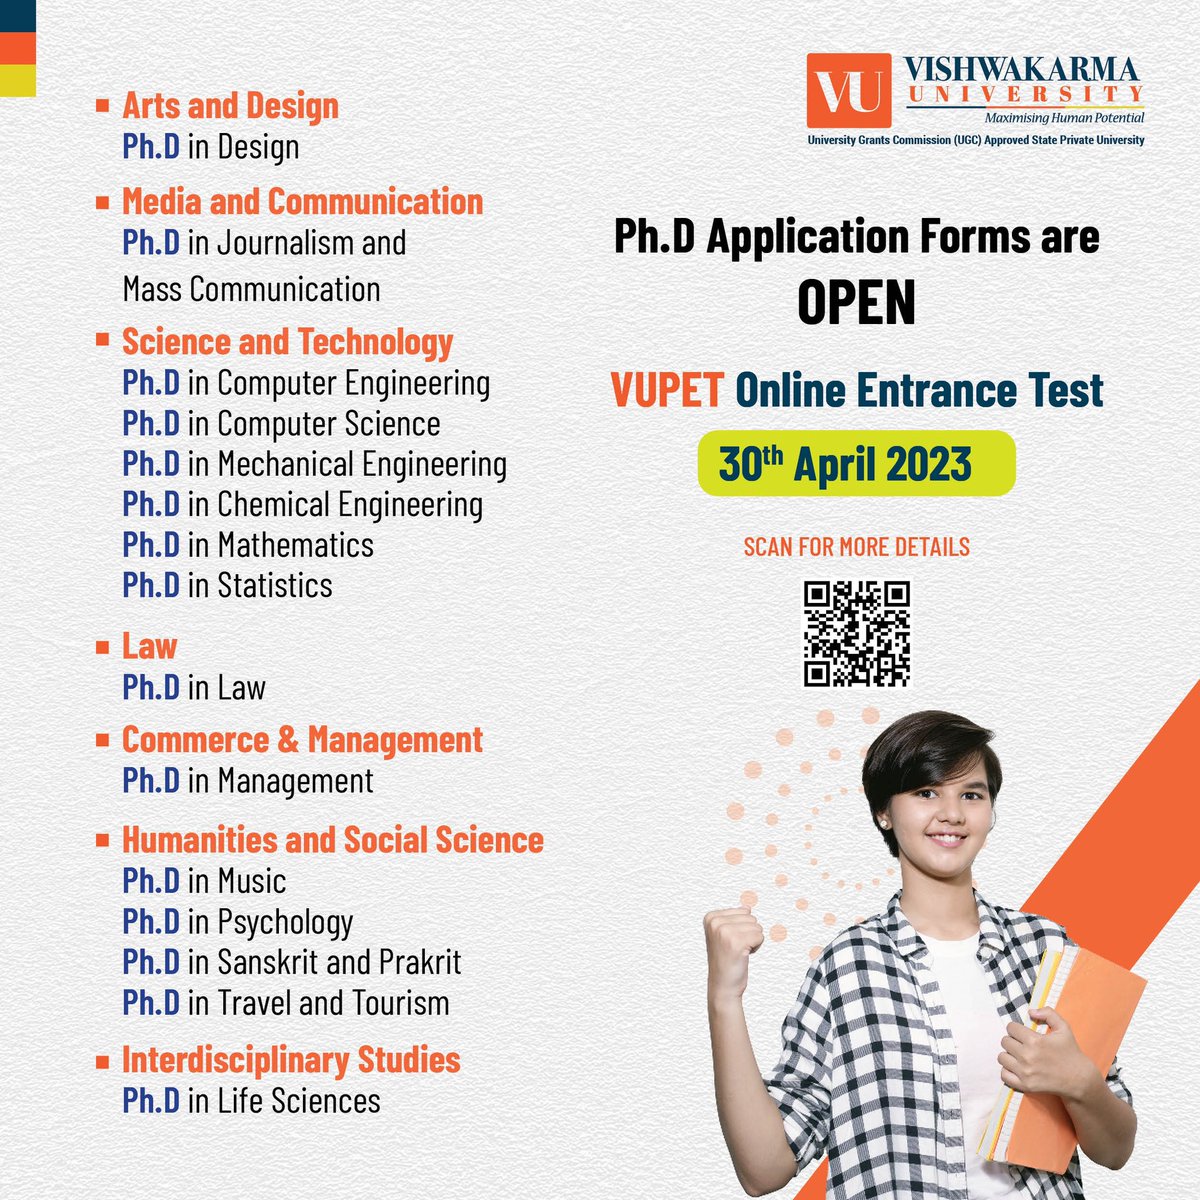 The last date for submission of application forms is April 25th, 2023. To apply, visit the Vishwakarma University website (vupune.ac.in/academicss/phd…) and follow the instructions for online application.

#vishwakarmauniversity #vupet #onlineentrancetest #applynow #phdprogram